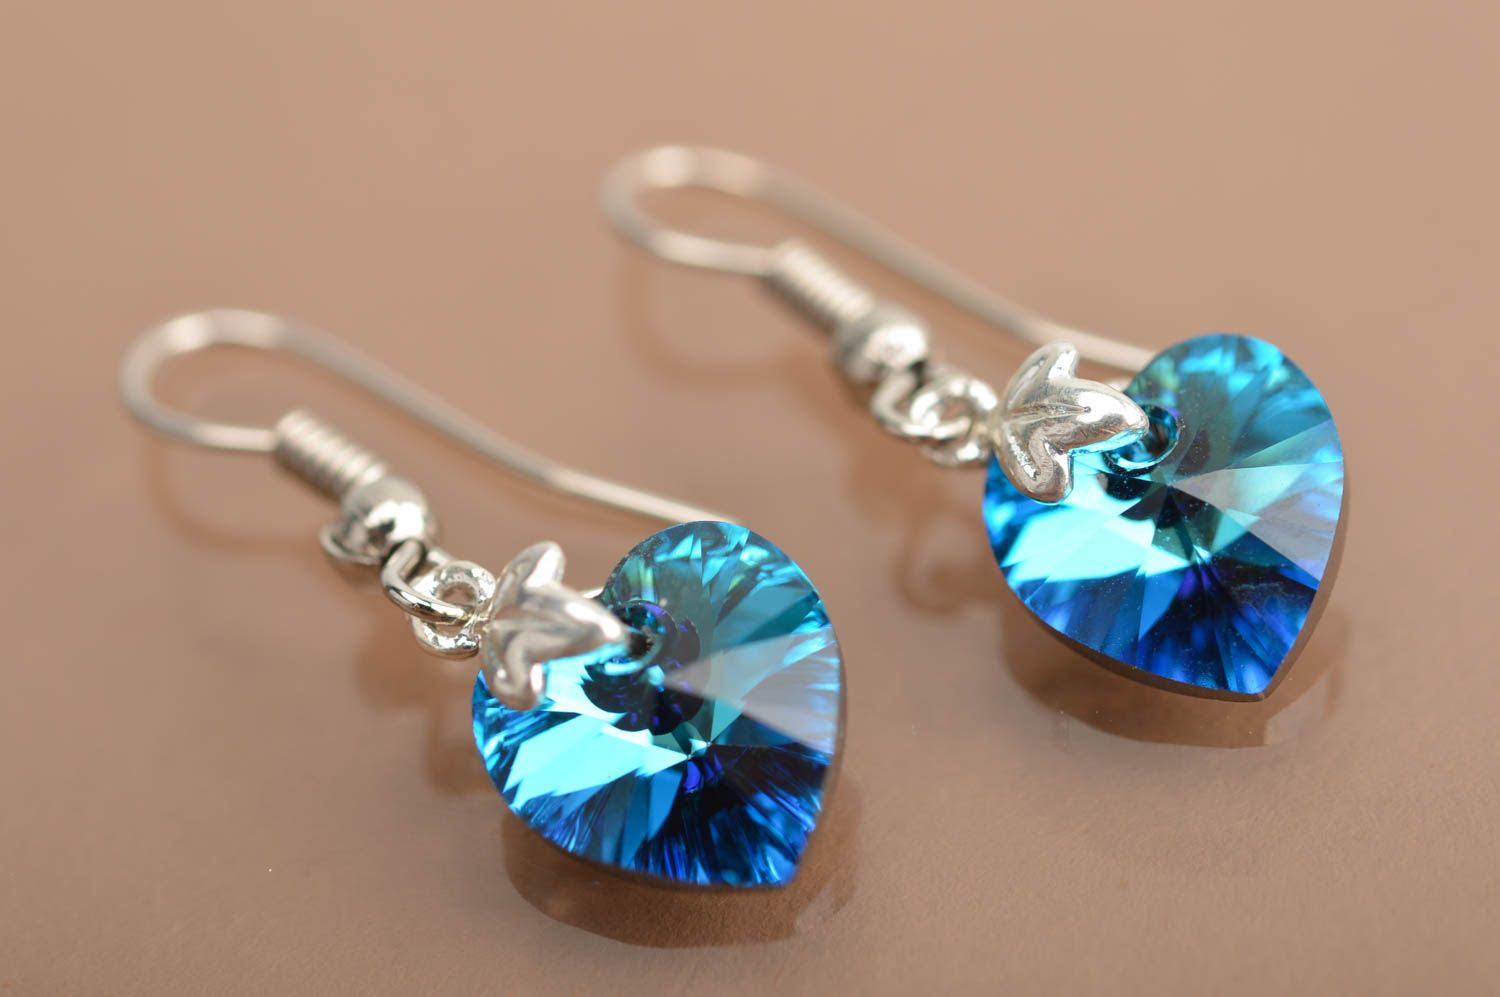 Handmade stylish earrings with Austrian stones and strasses blue hearts photo 2